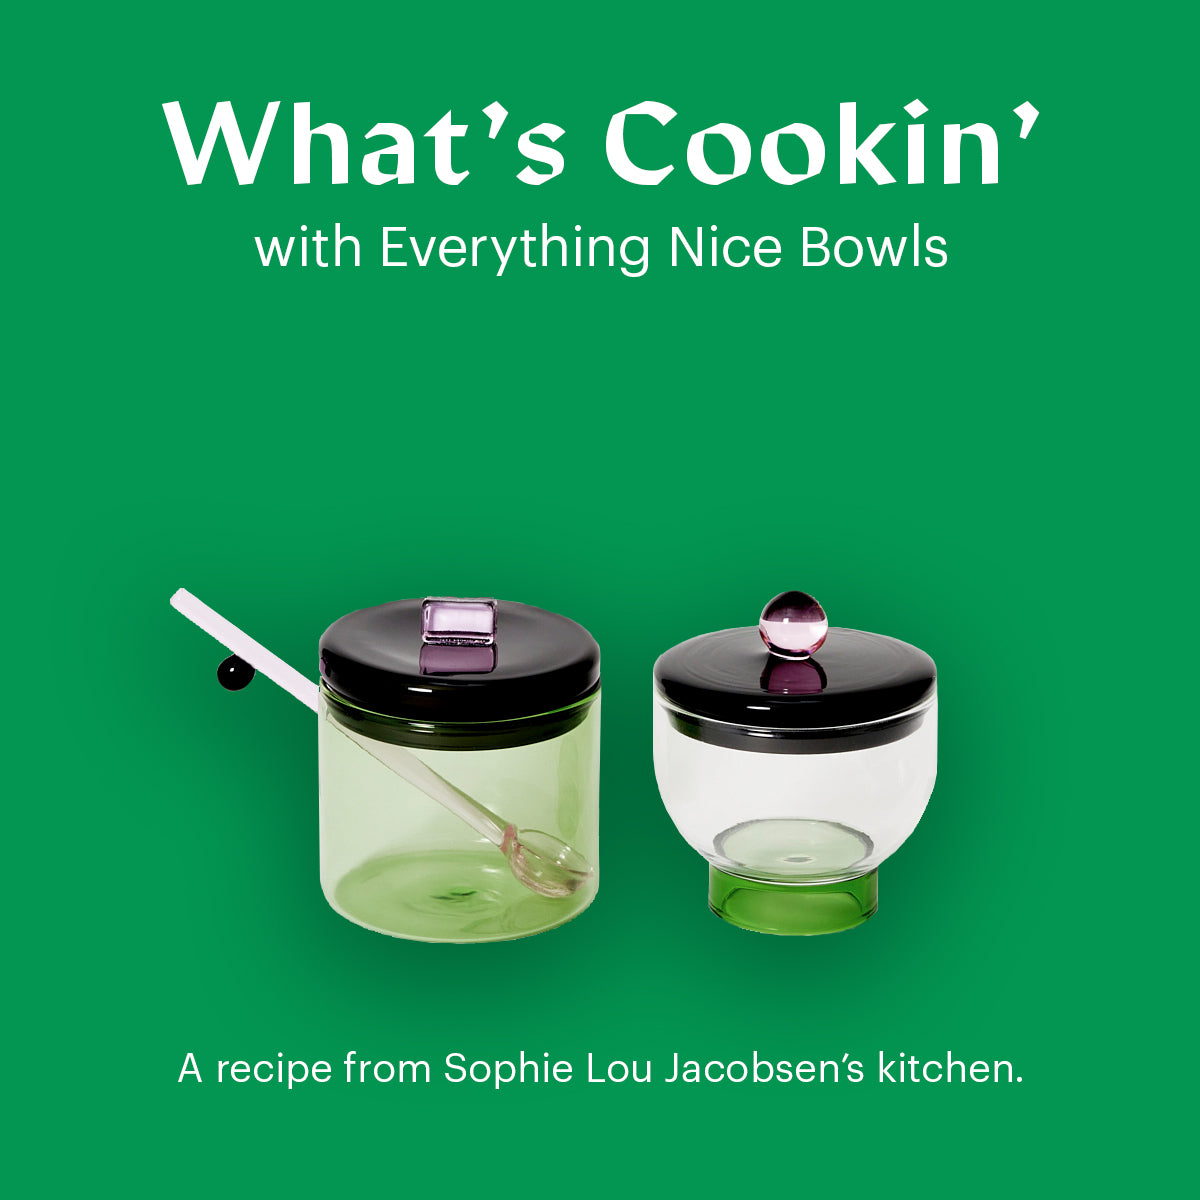 What's Cookin' with Everything Nice Bowls